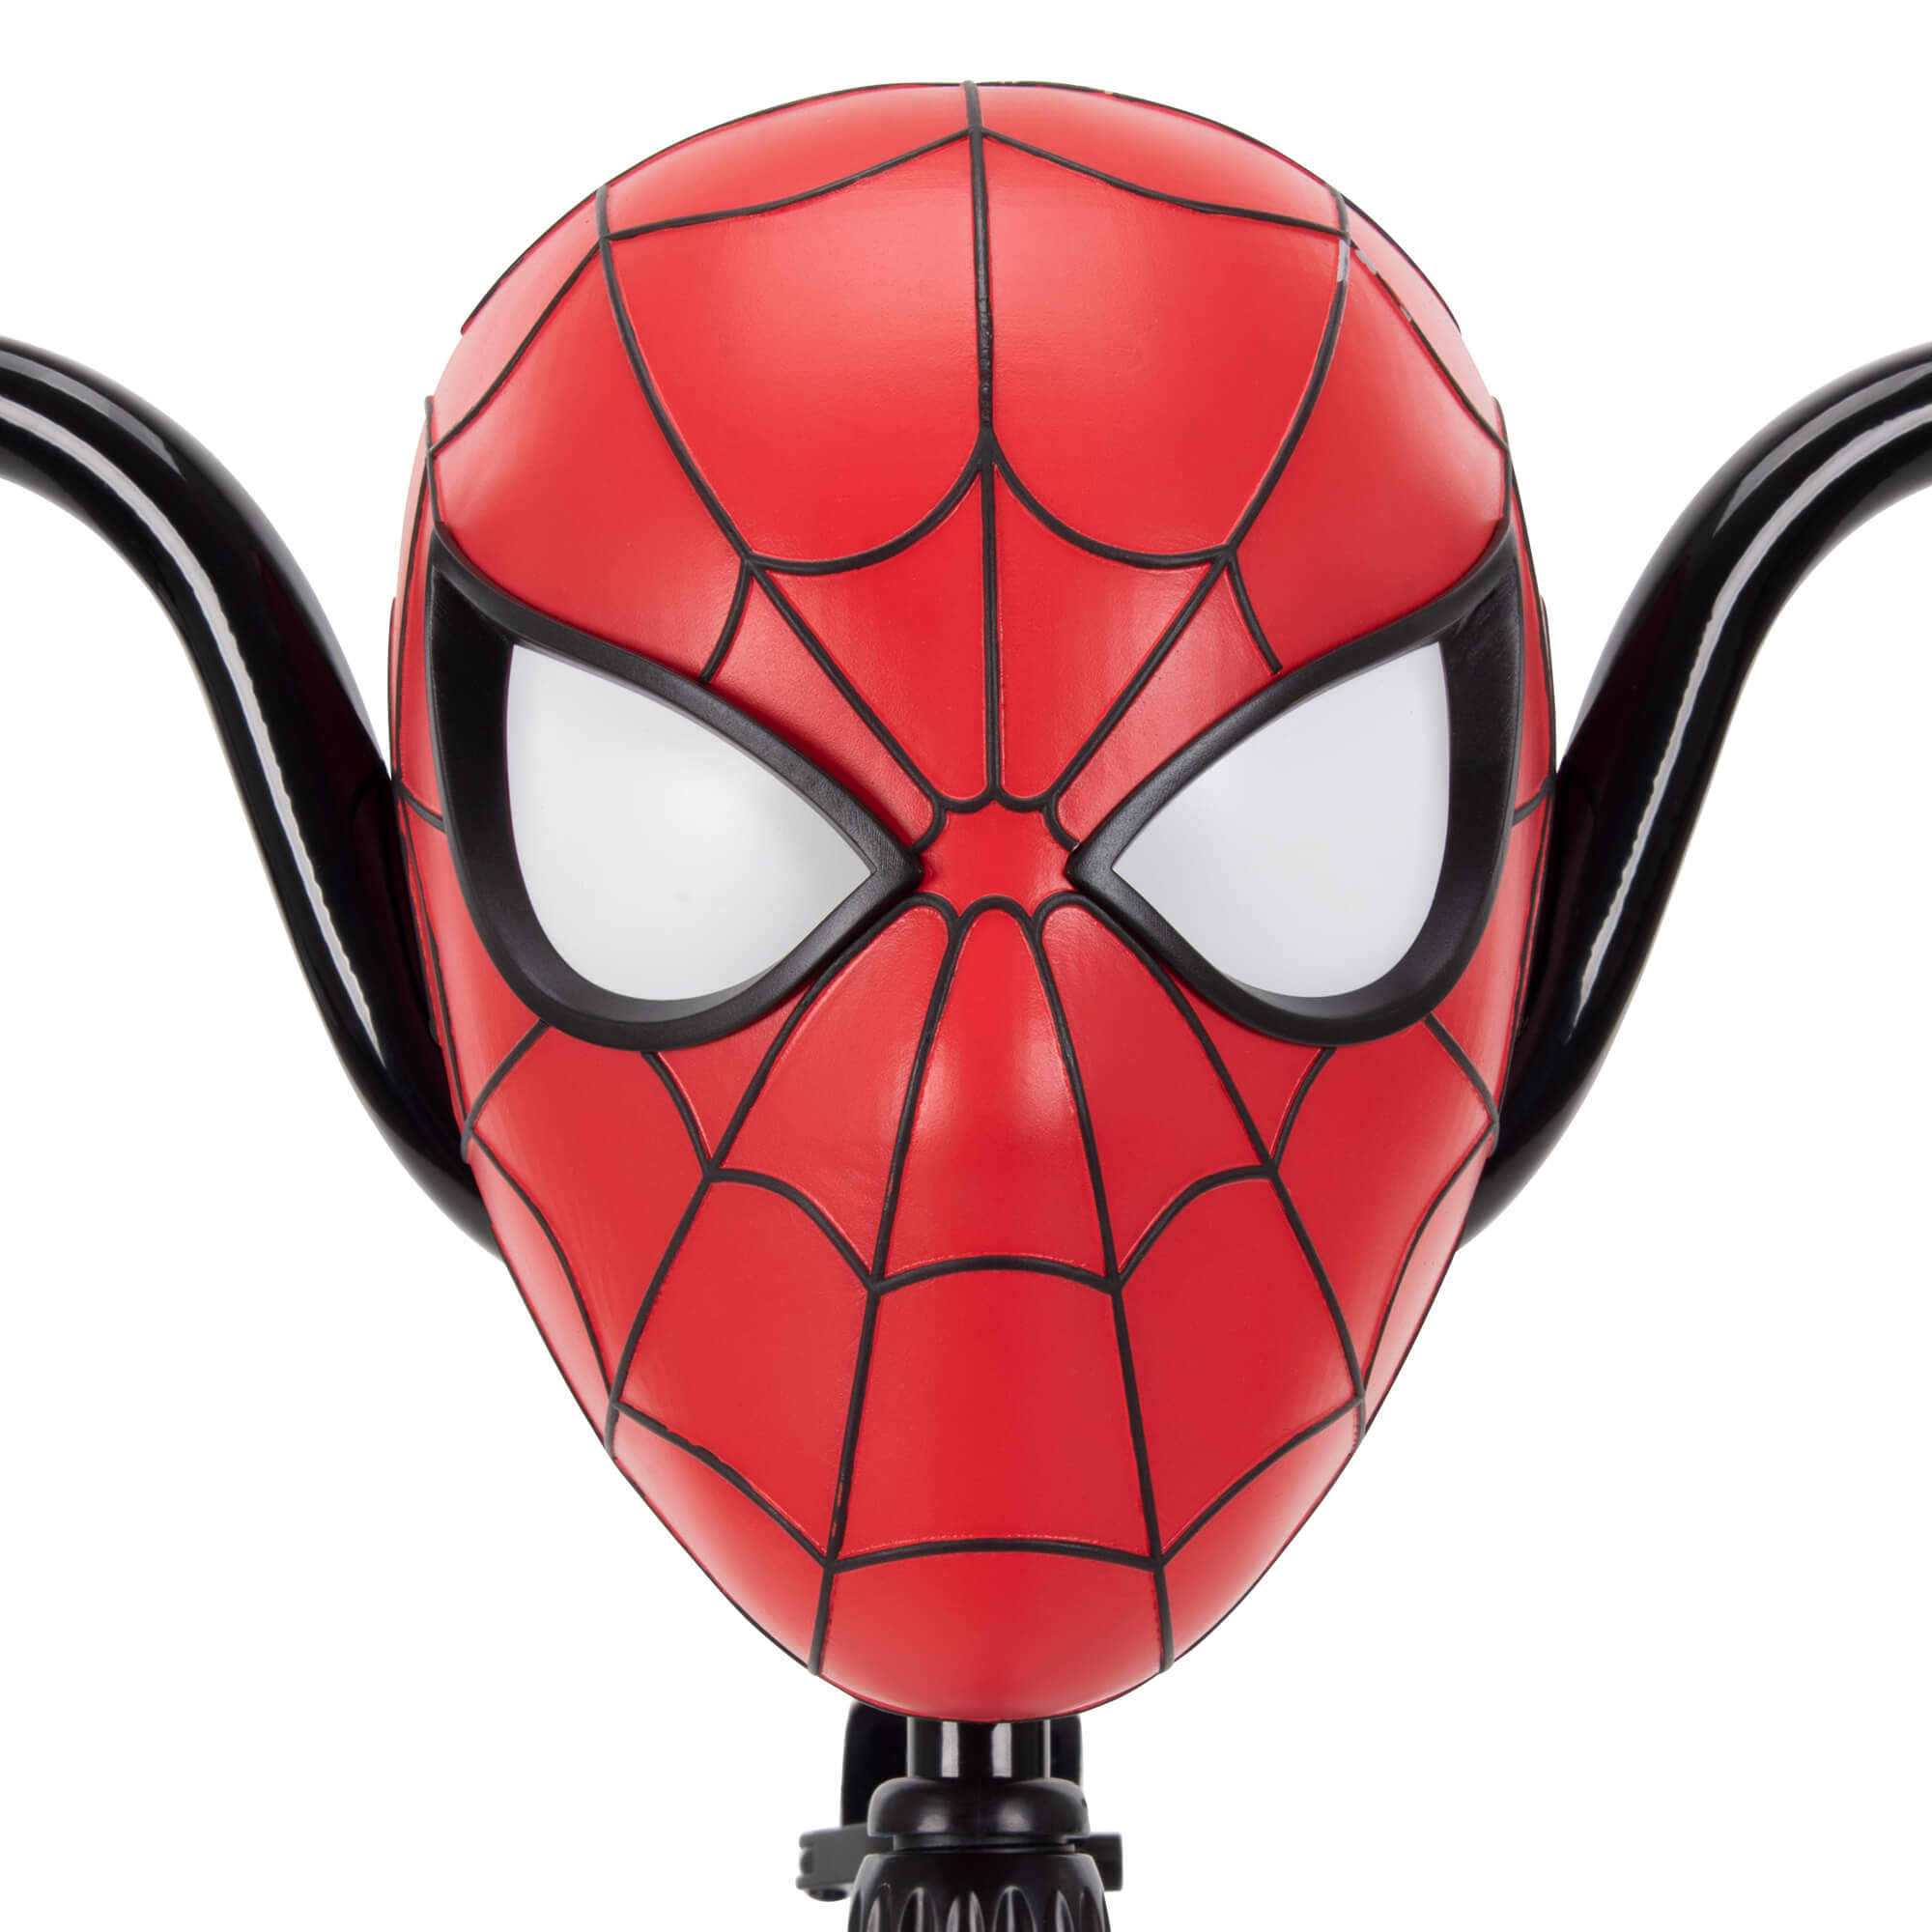 16" Marvel Spider-Man Bike for Boys' by Huffy - image 5 of 11